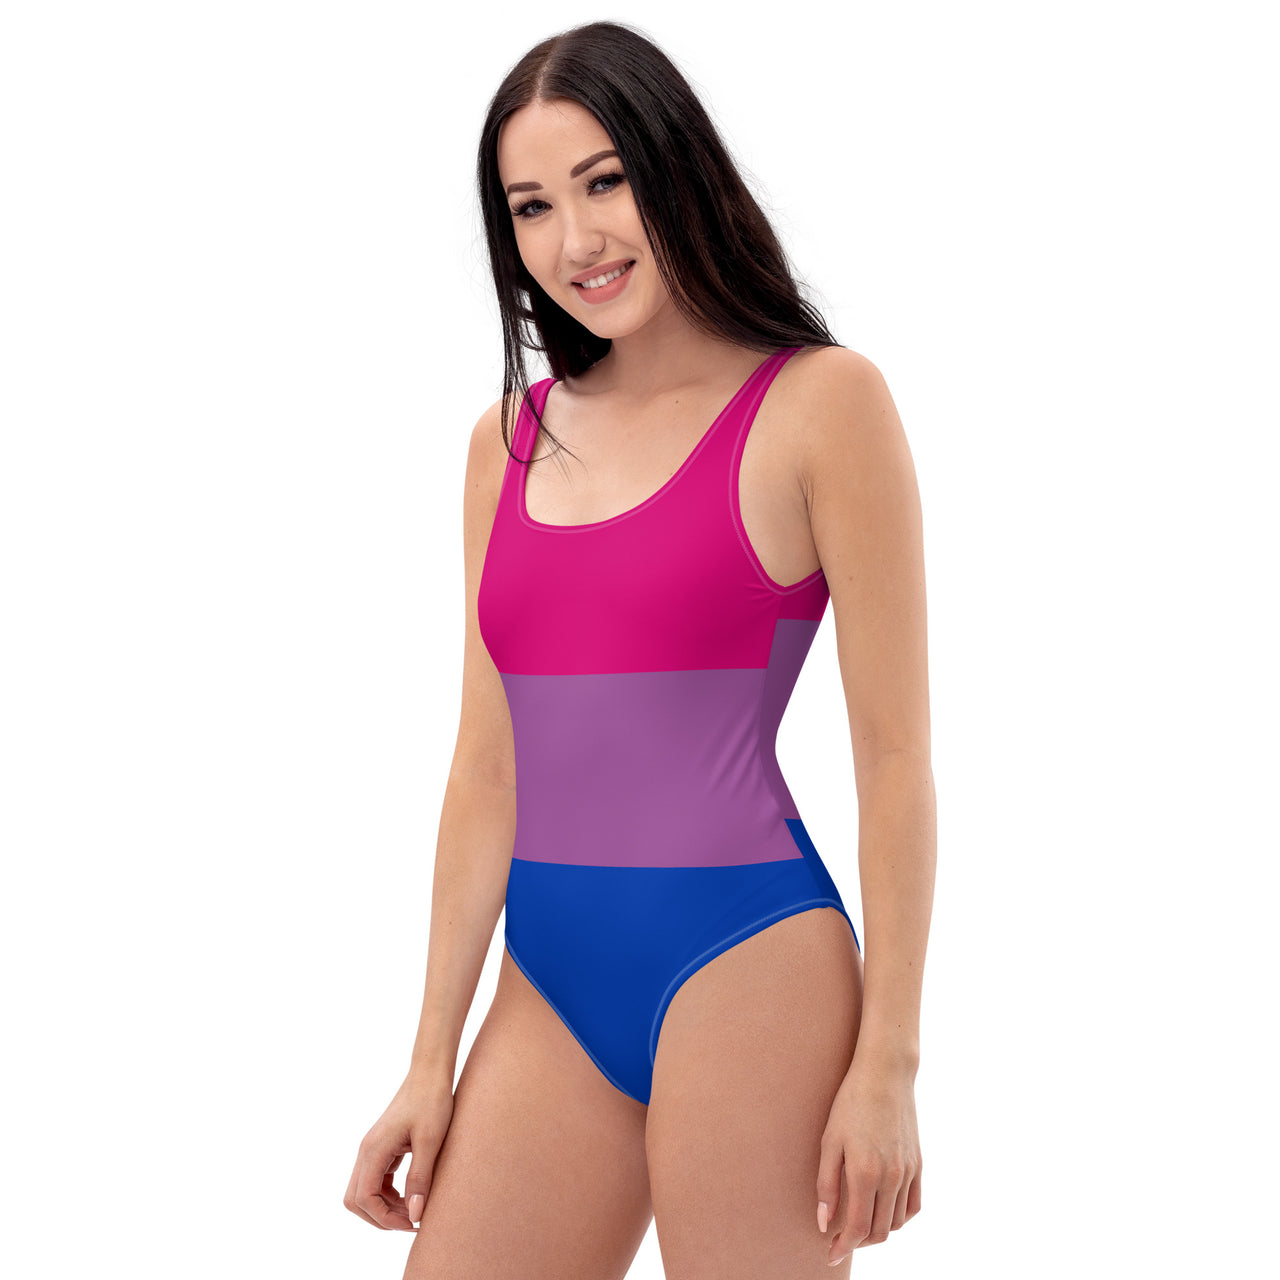 Bisexual Flag LGBTQ One-Piece Swimsuit Women’s Size SHAVA CO